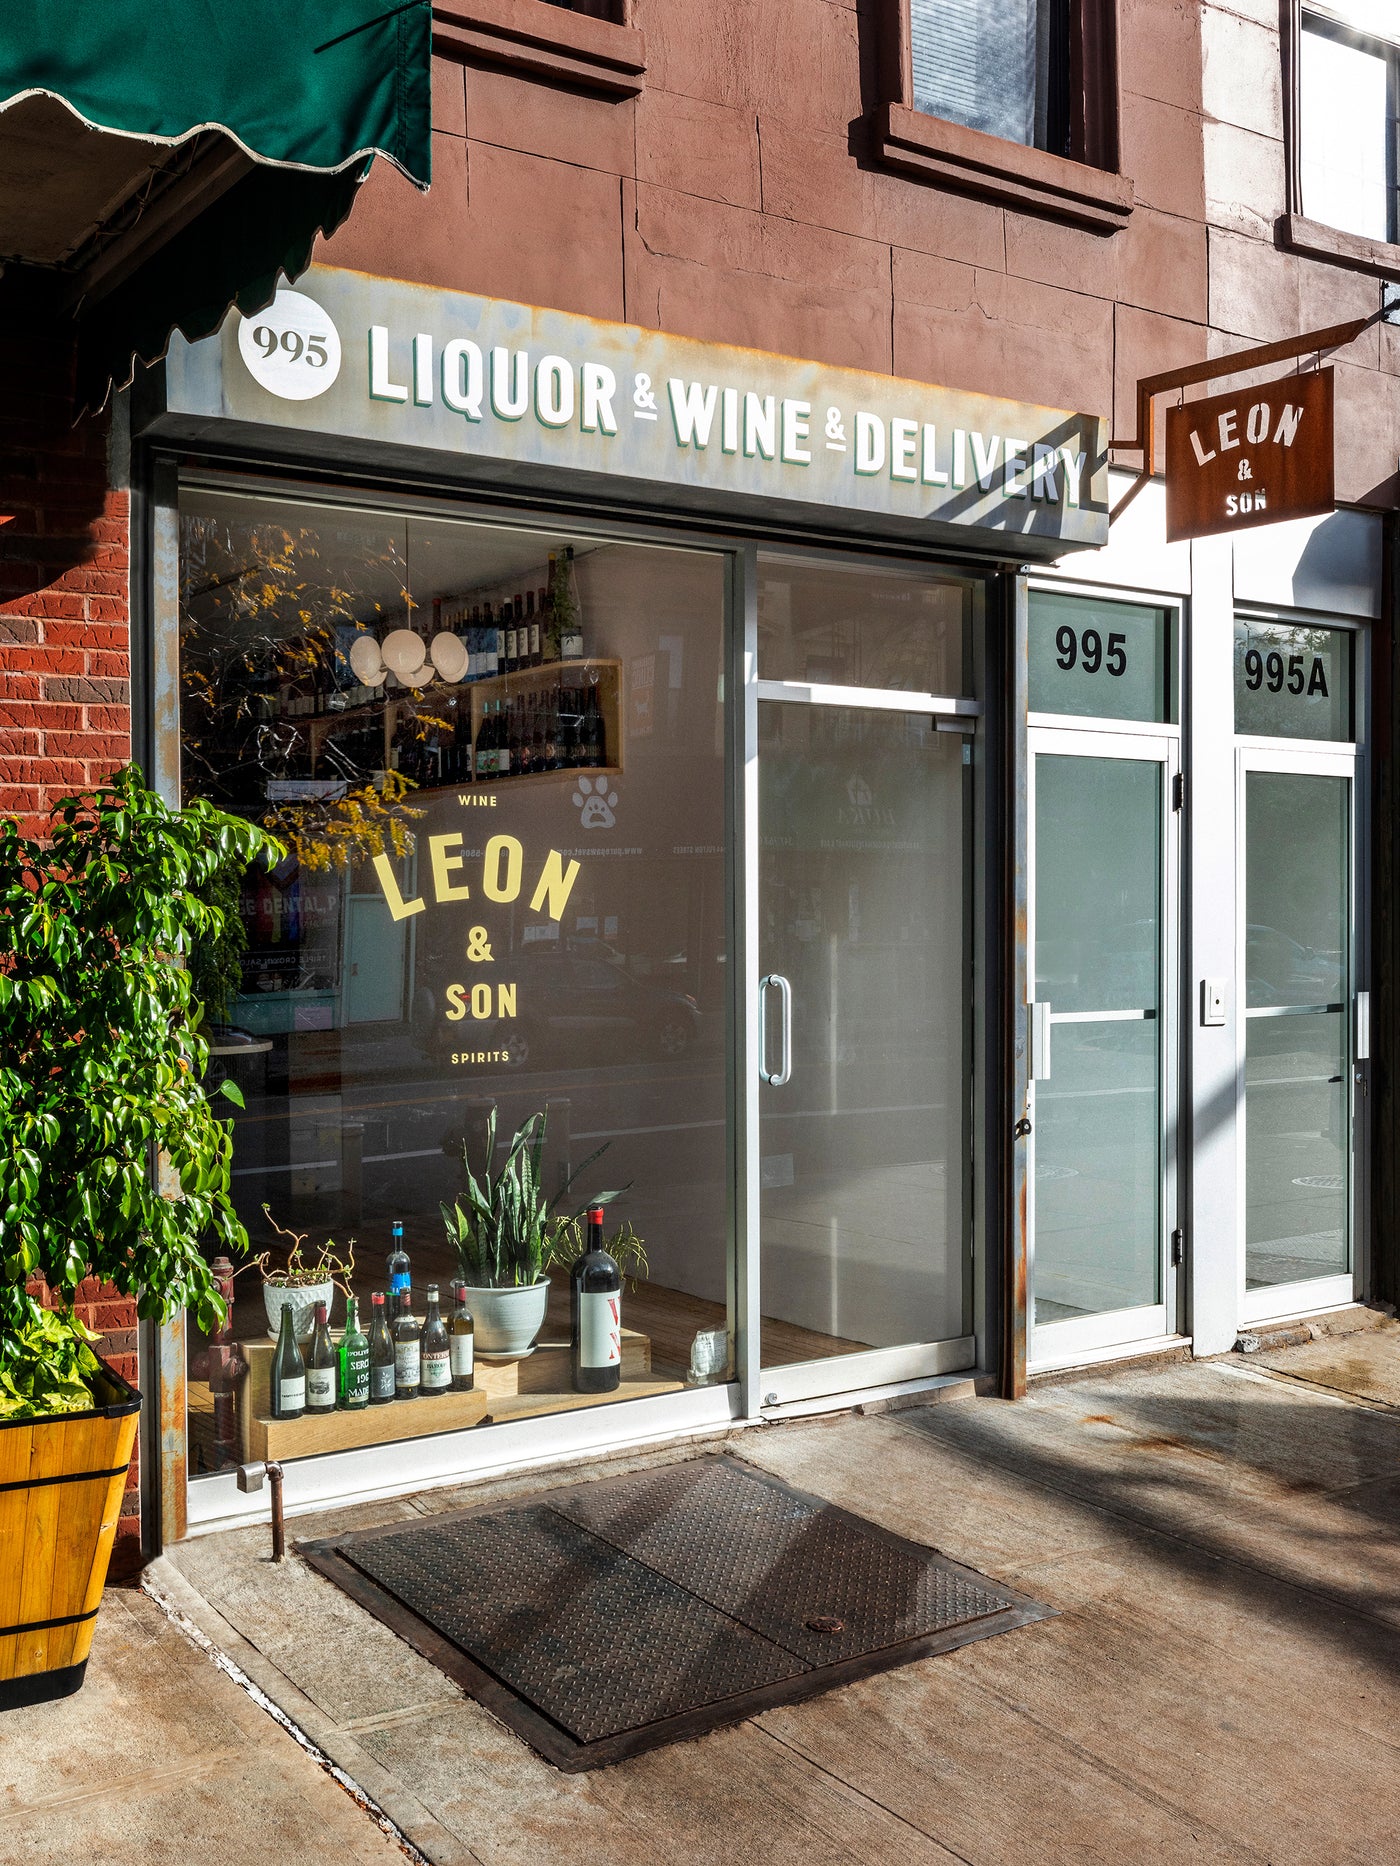 Founded in Clinton Hill, Brooklyn in 2015, we are an ambitious neighborhood wine and spirits store known for curating benchmark bottlings from classic growing regions alongside hidden gems from progressive natural winemakers.